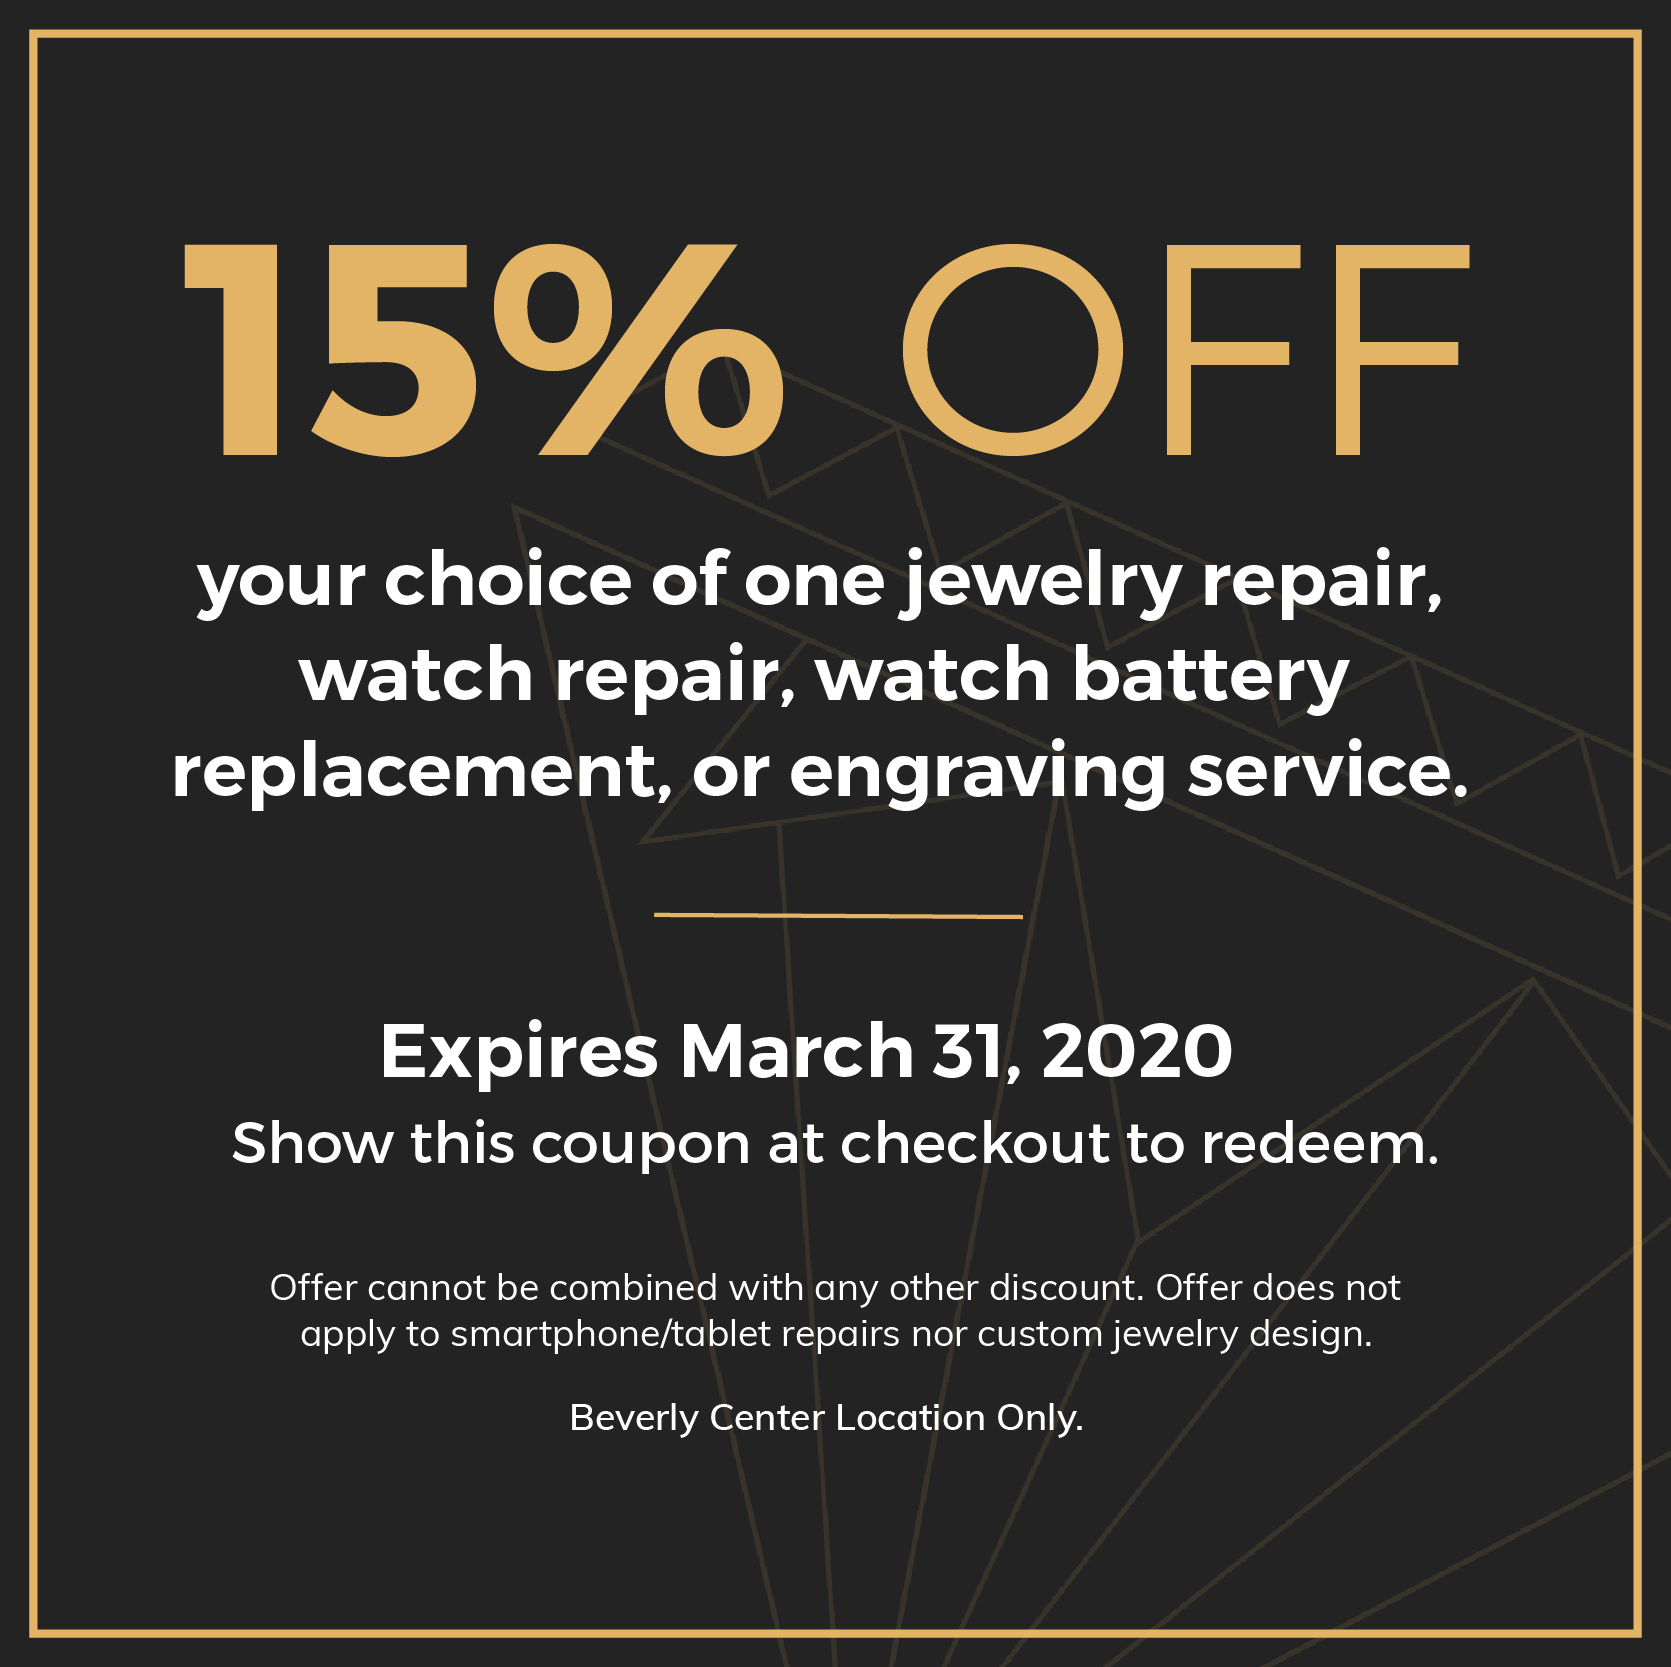 15% OFF. your choice of one jewelry repair, watch repair, watch battery replacement, or engraving service. Expires March 31, 2020. Show this coupon at checkout to redeem. Offer cannot be combined with any other discount. Offer does not apply to smartphone/tablet repairs nor custom jewelry design. Beverly Center Location Only.